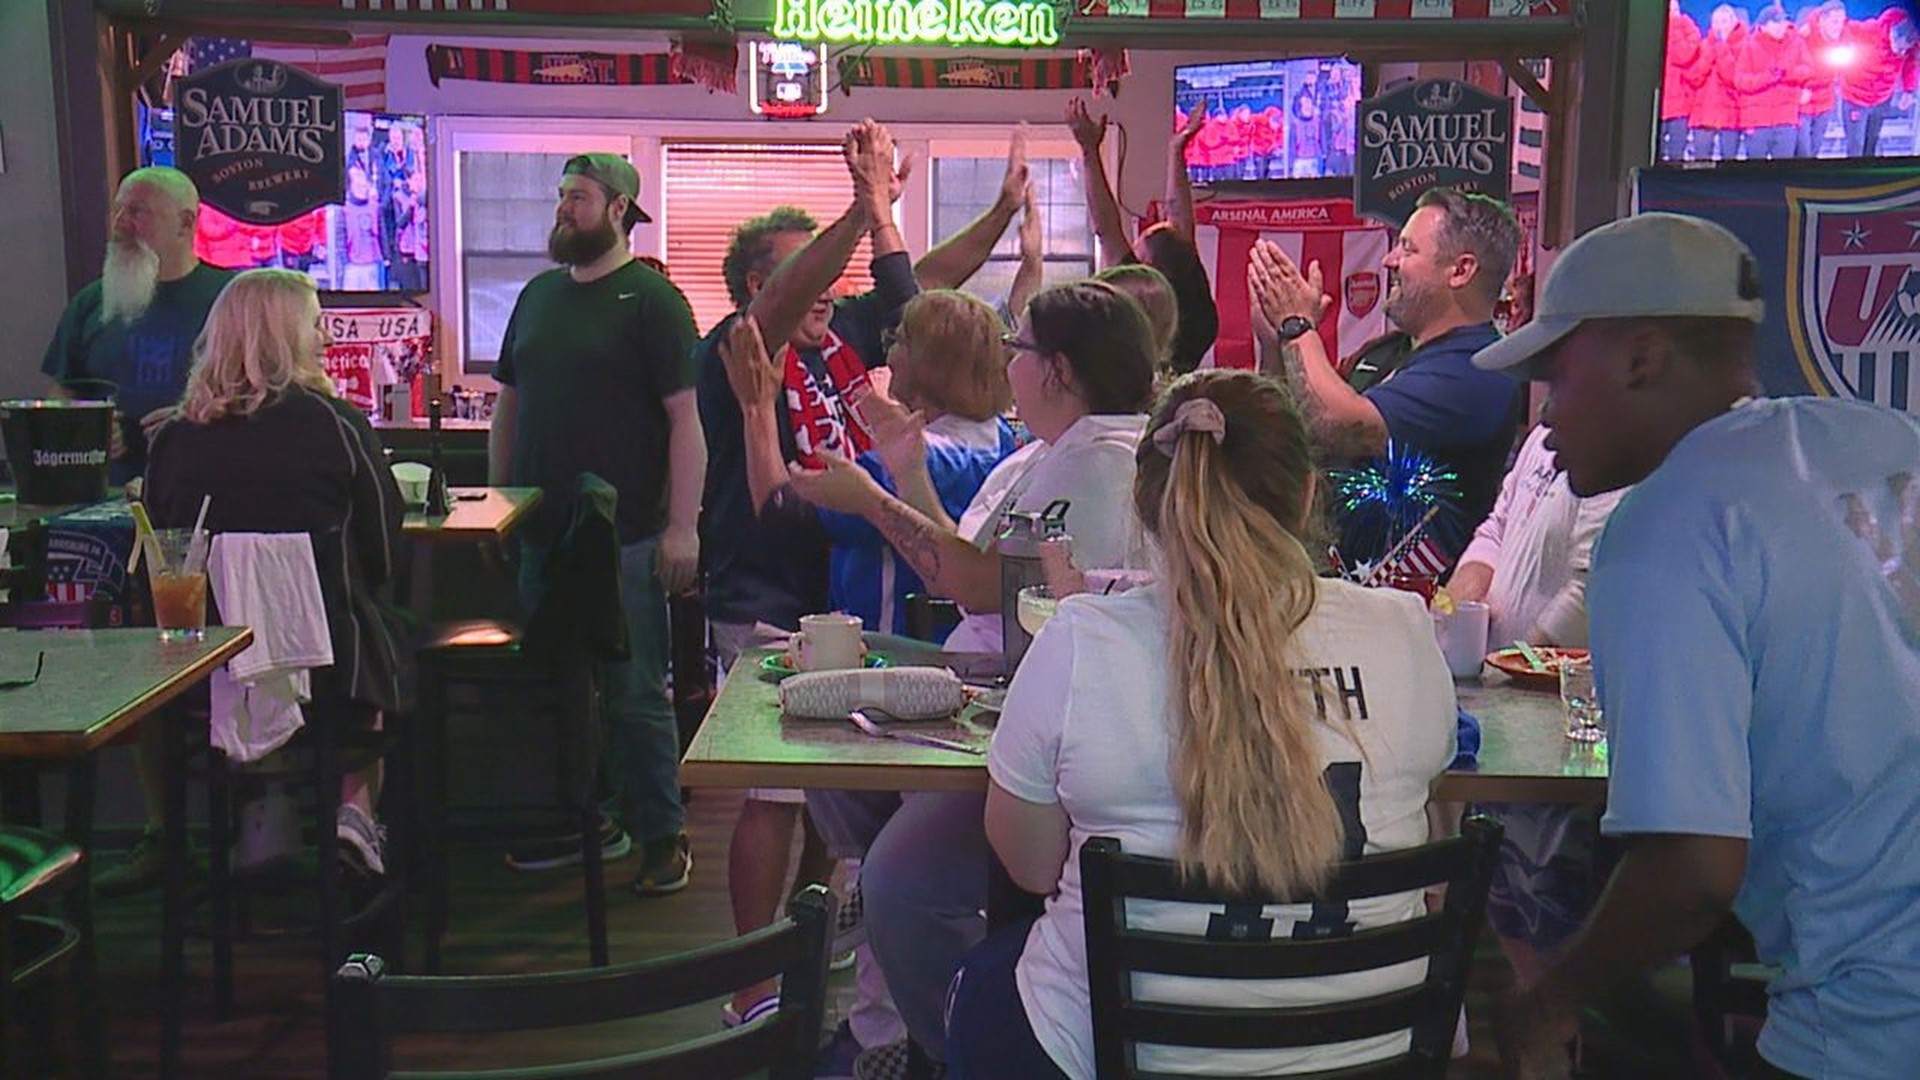 The Harrisburg chapter of the American Outlaws head to Mr. G's in Harrisburg, which opened at 4:45 AM on game day.